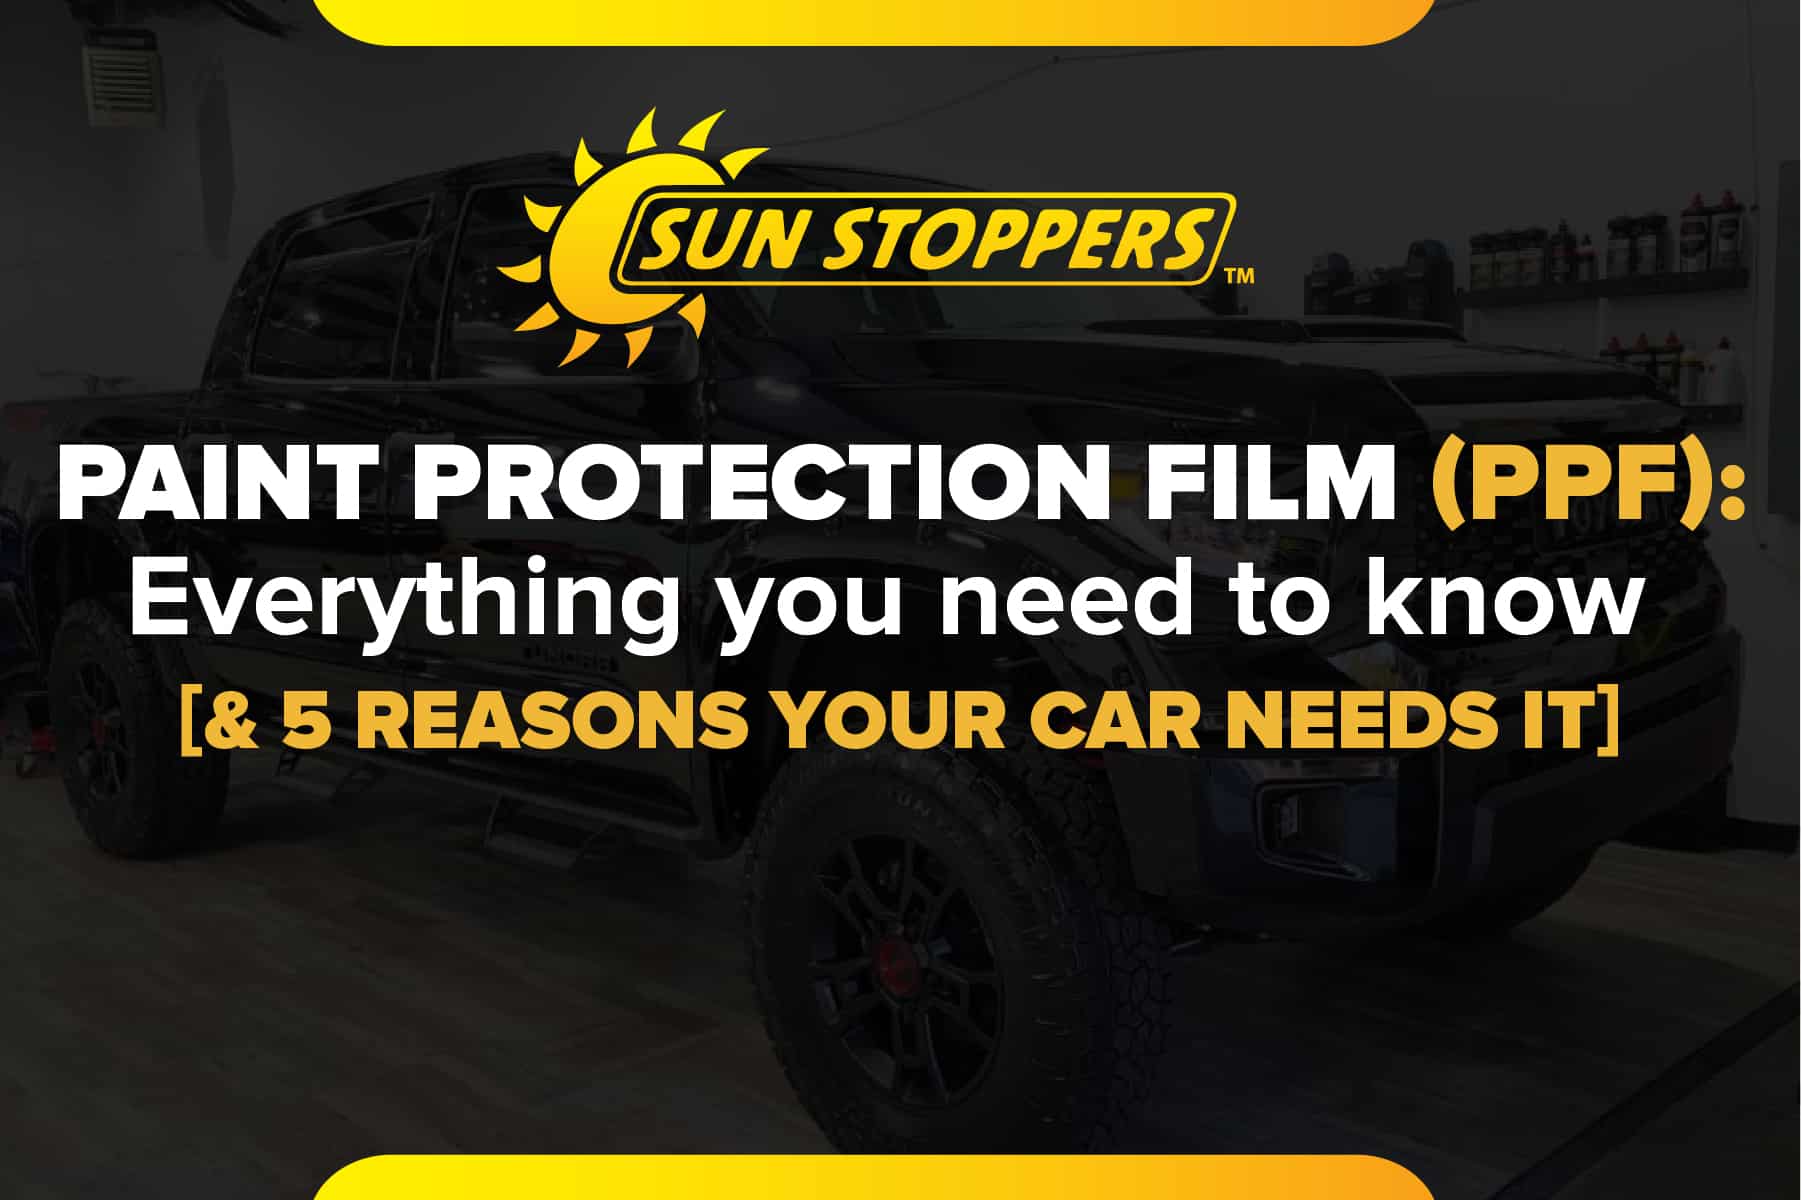 Paint Protection Film (PPF): Everything you need to know